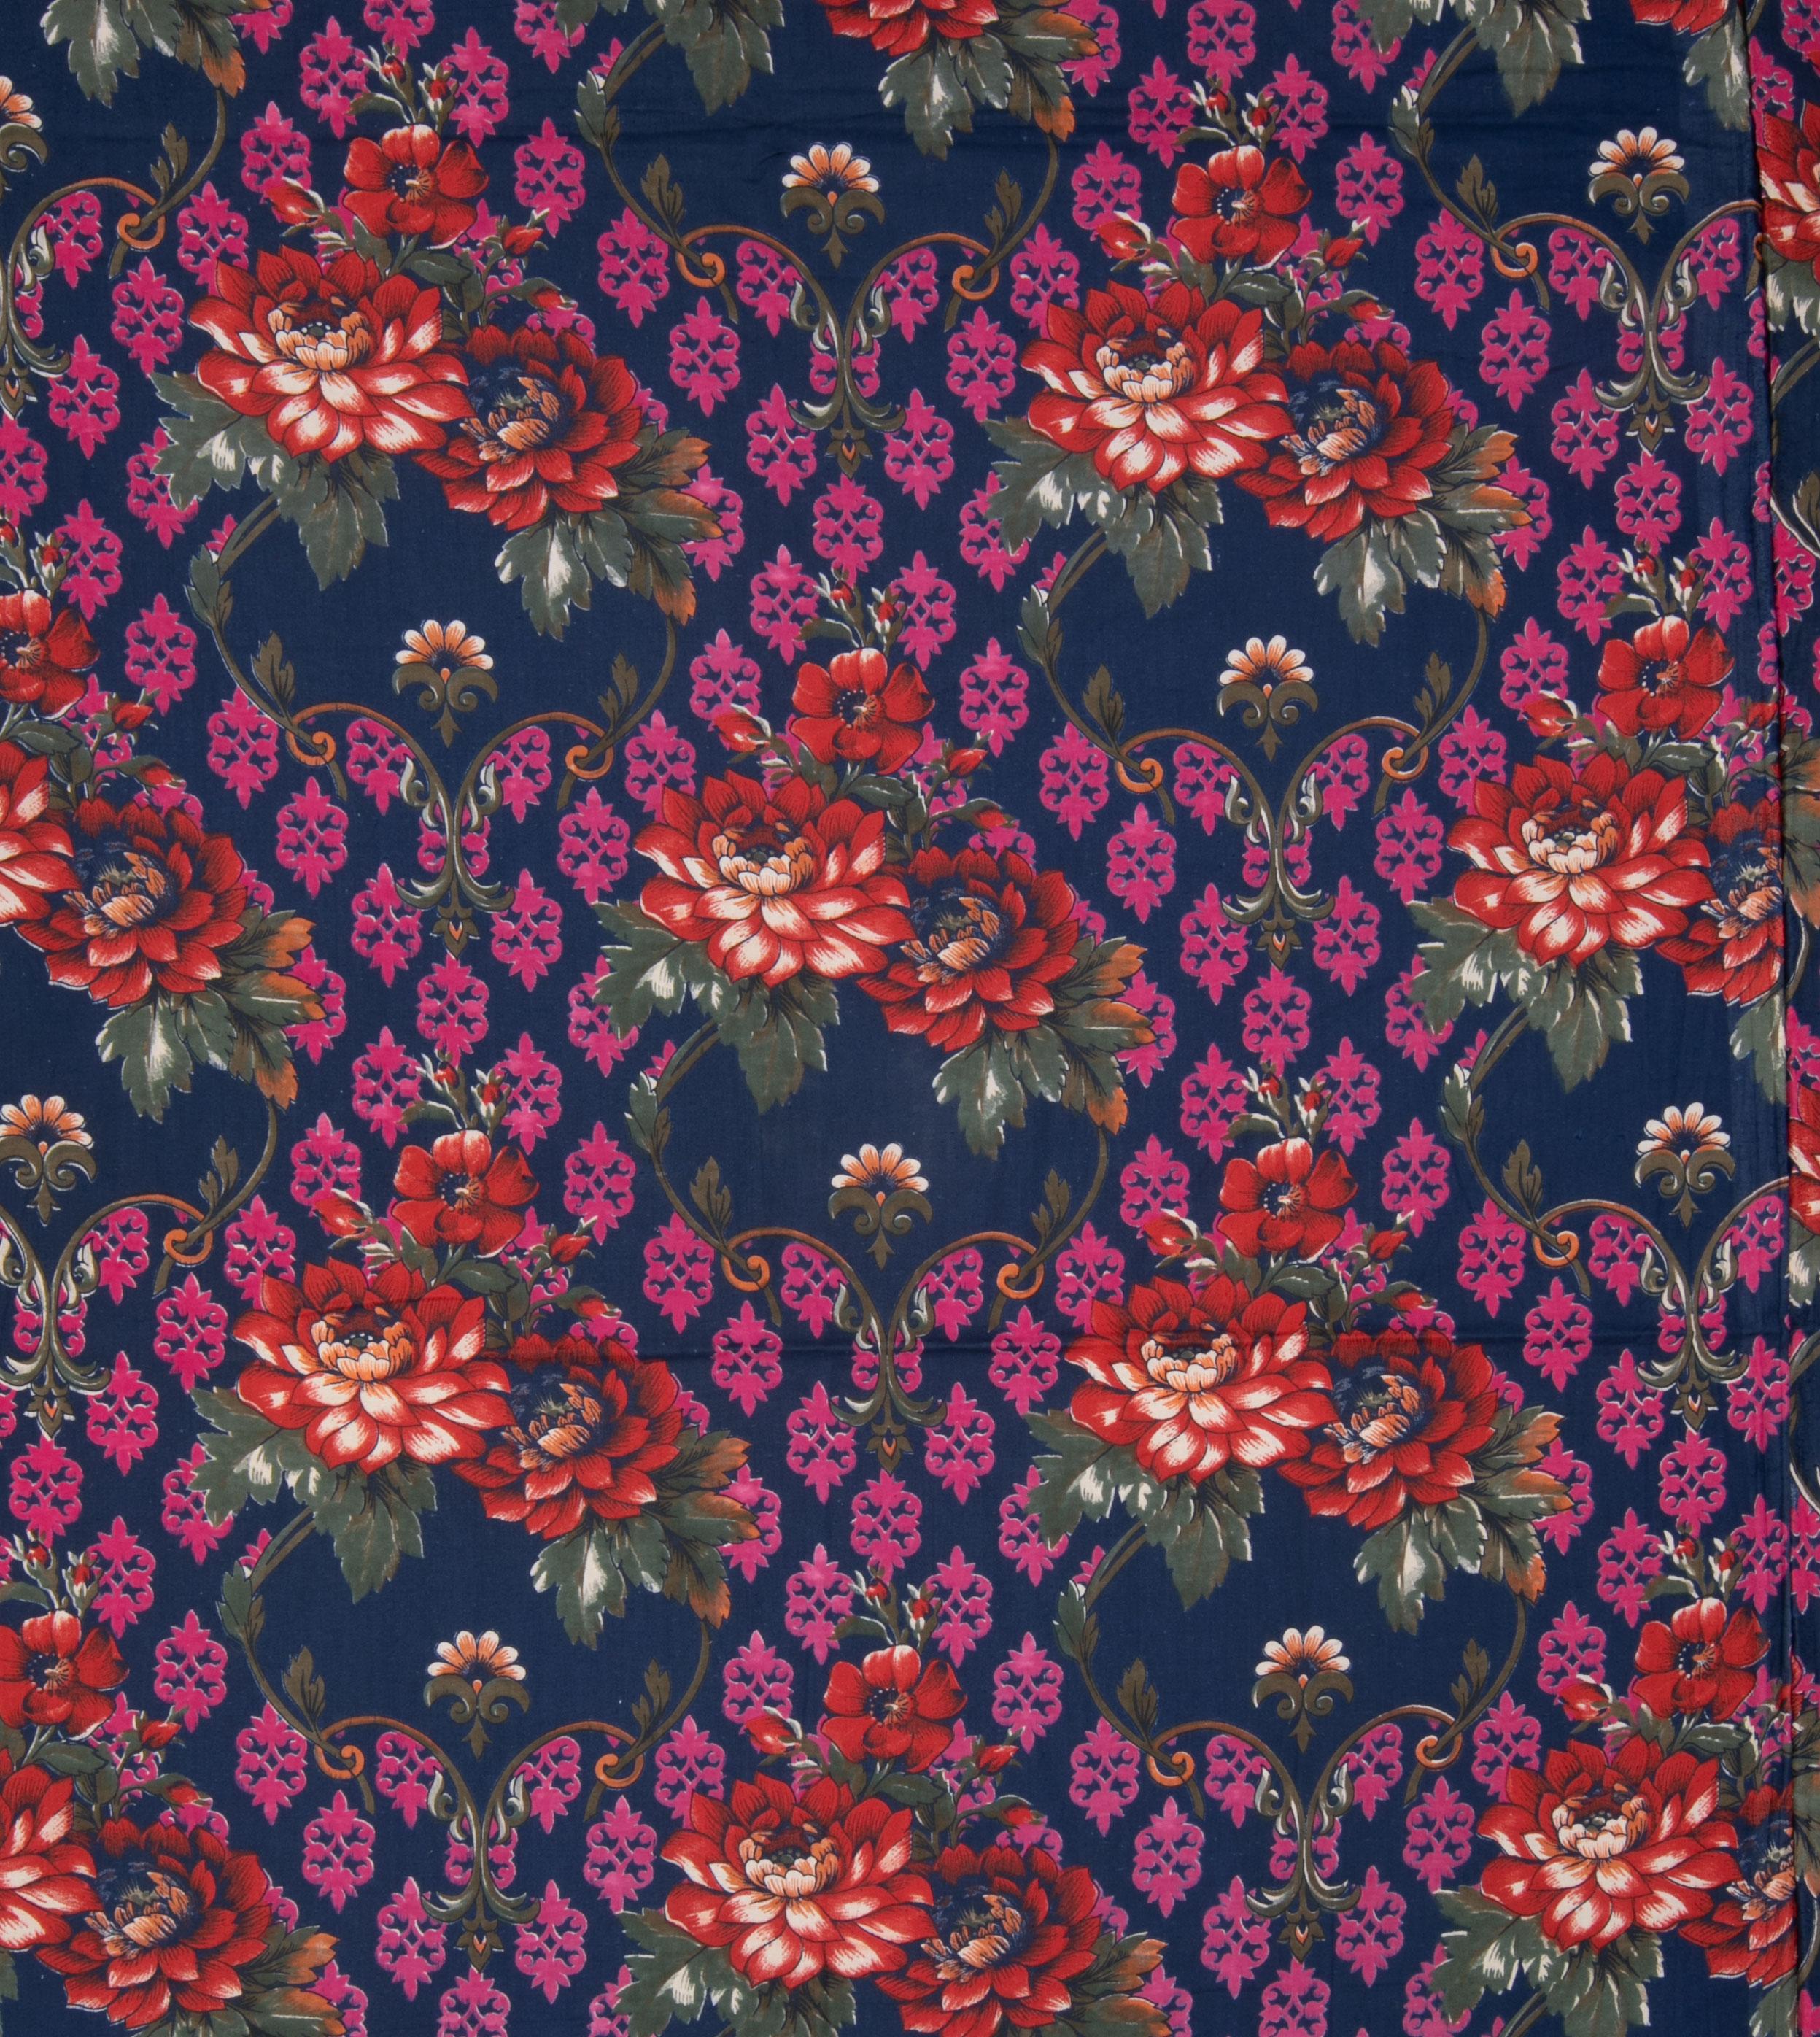 Mid-Century Modern Russian Roller Printed Cotton Fabric Panel, Mid-20th Century or Earlier For Sale